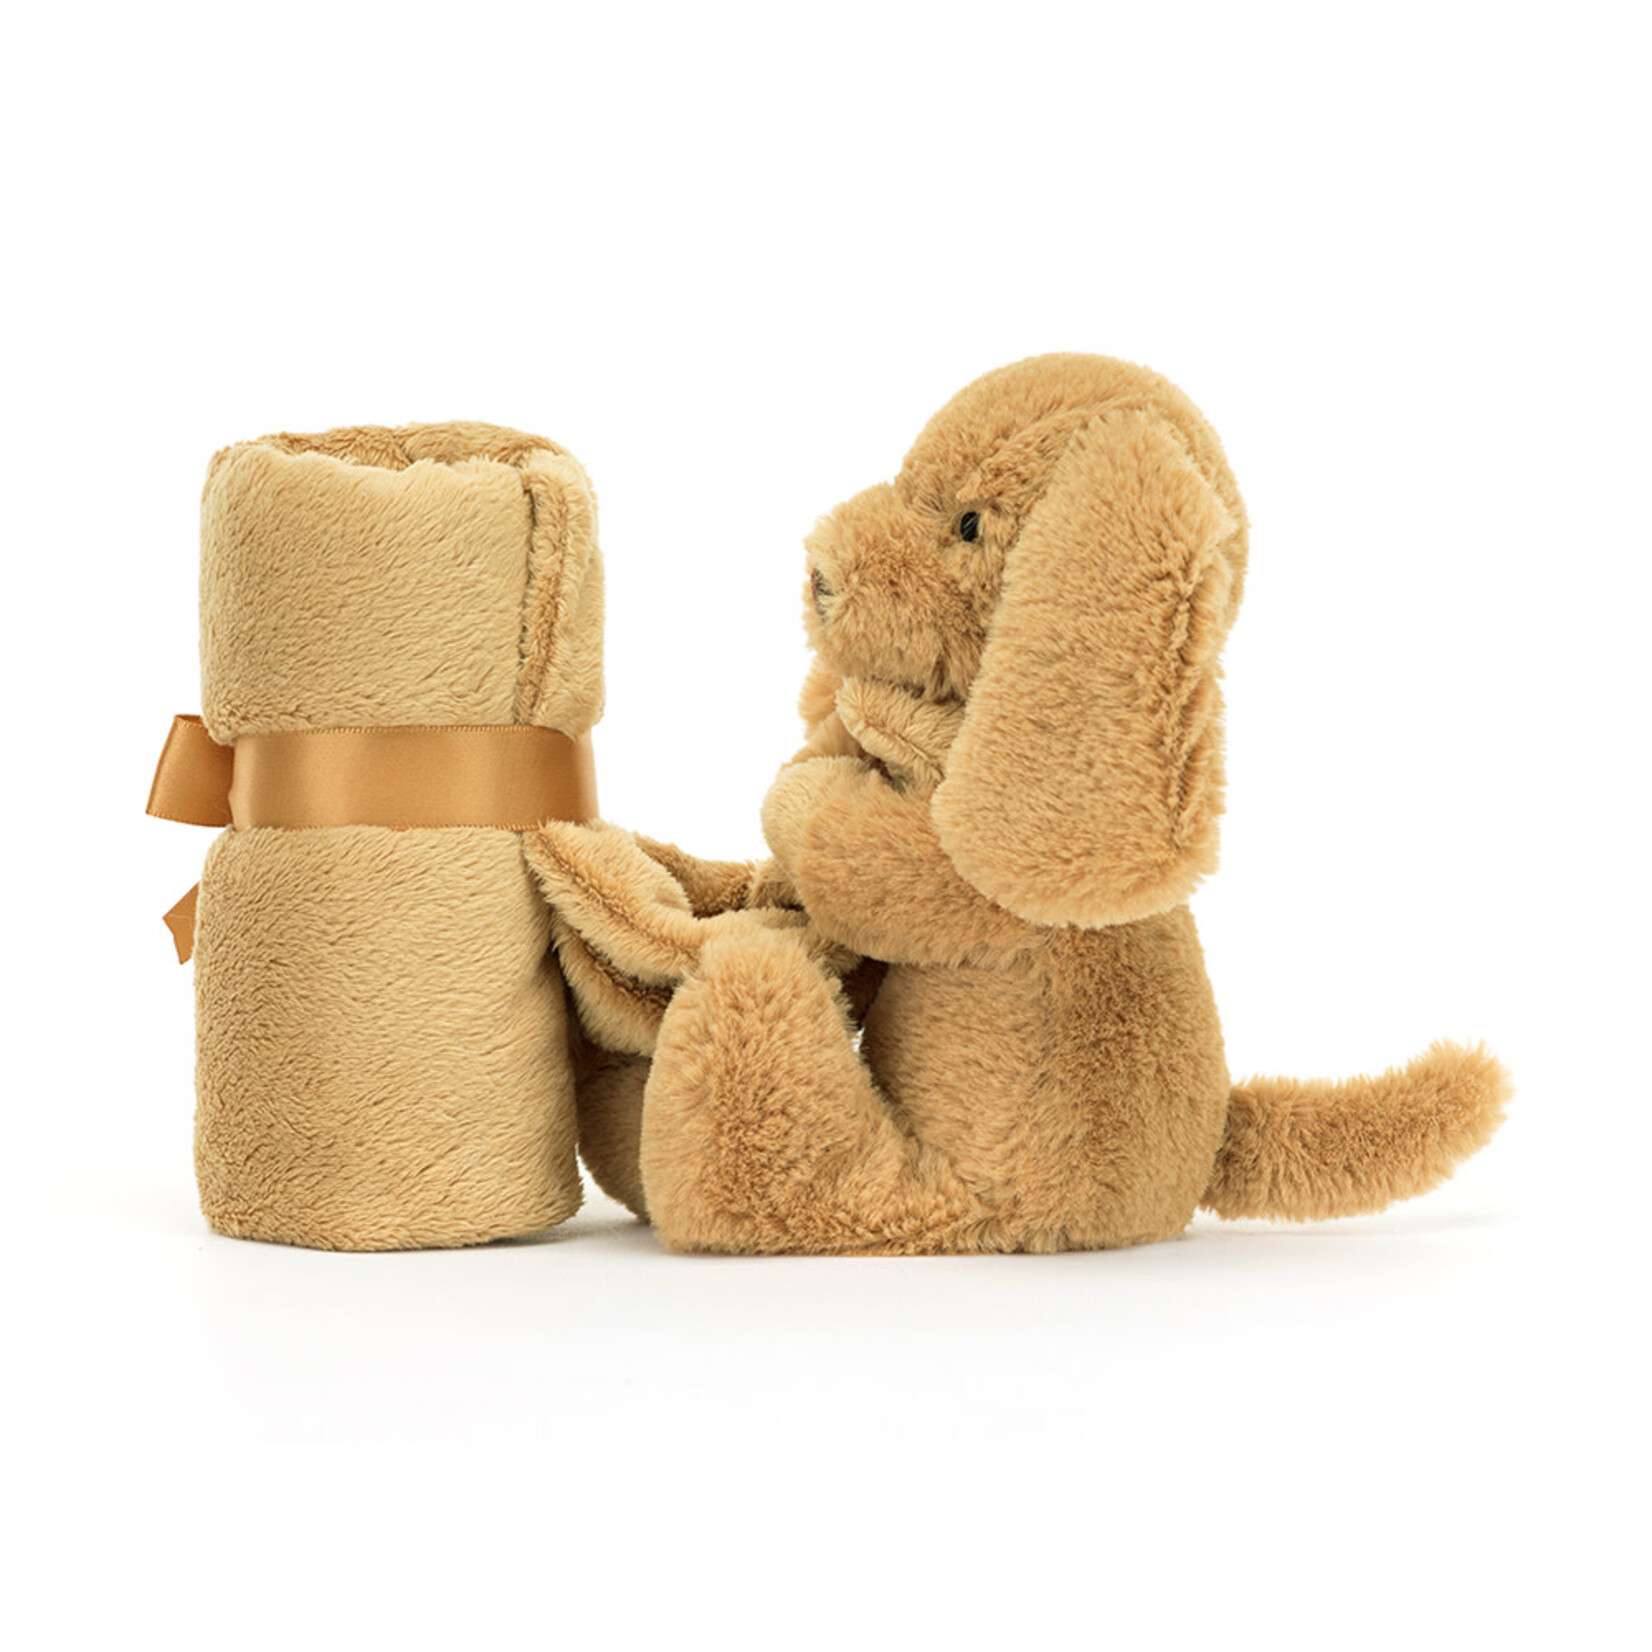 Jellycat Jellycat Bashful Toffee Puppy Soother